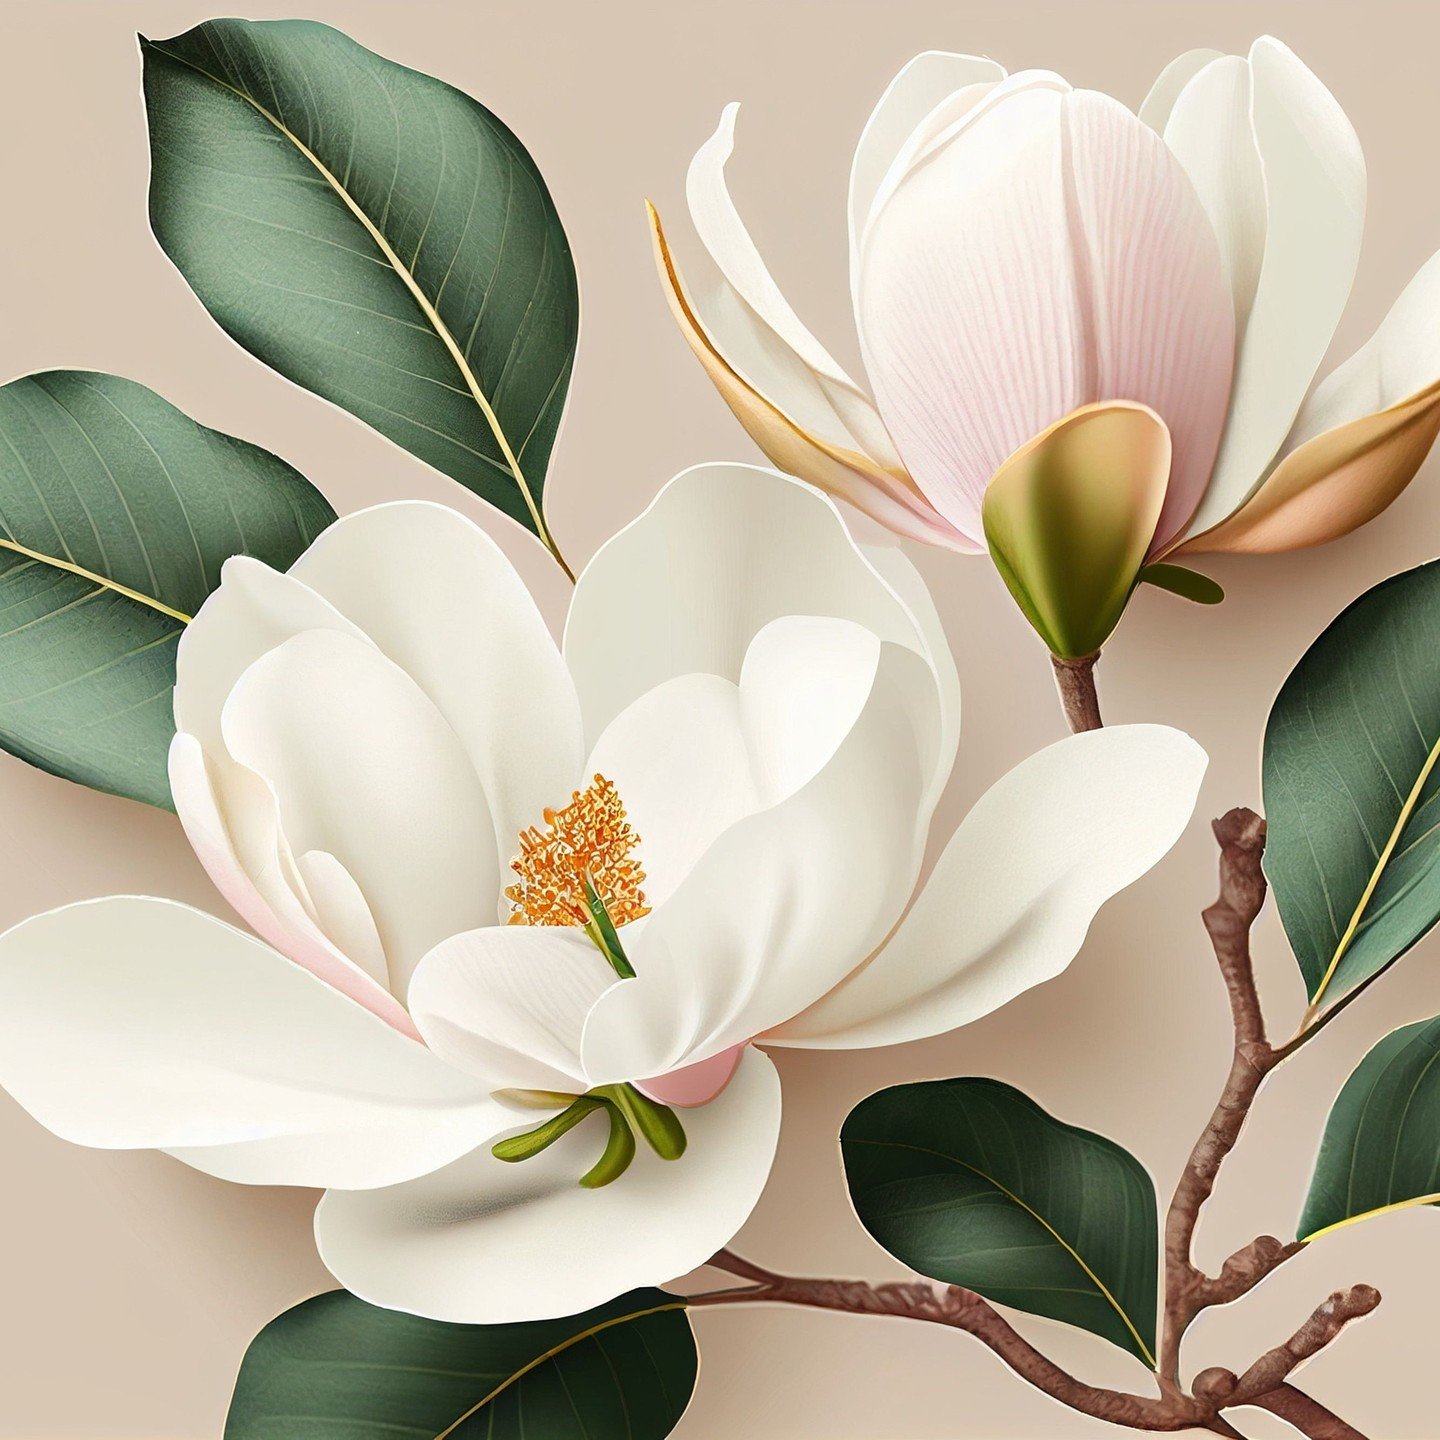 &quot;There&rsquo;s a tree I planted at the edge of the yard on my birthday a few years ago: a small Jane magnolia bred for beauty and pleasure, and it has given me both. I&rsquo;m staring at that tree now as the wind is coming up and the weather is 